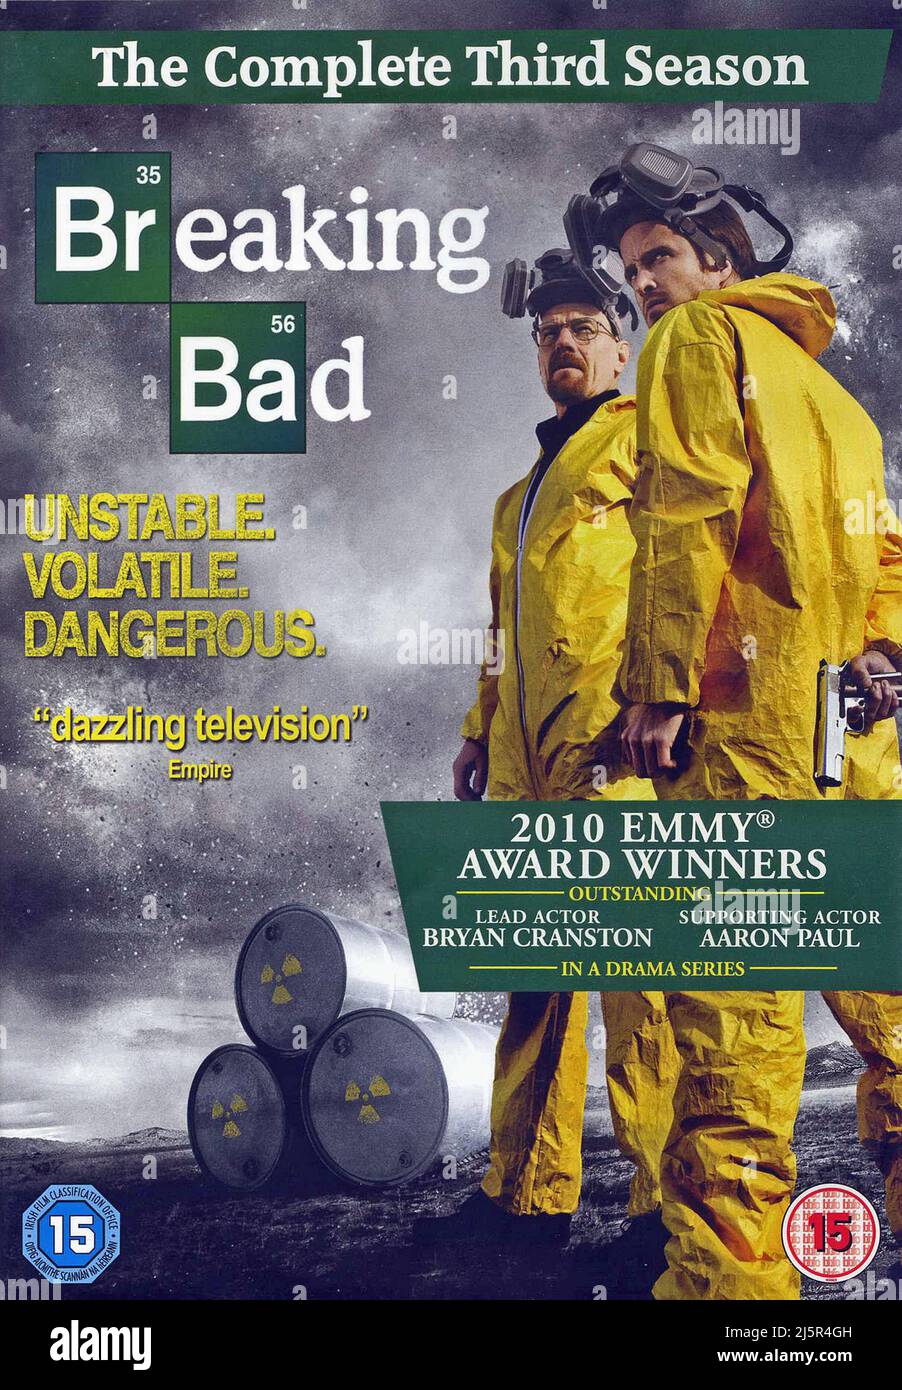 DVD cover. 'Breaking Bad' The Complete Third Season. Stock Photo